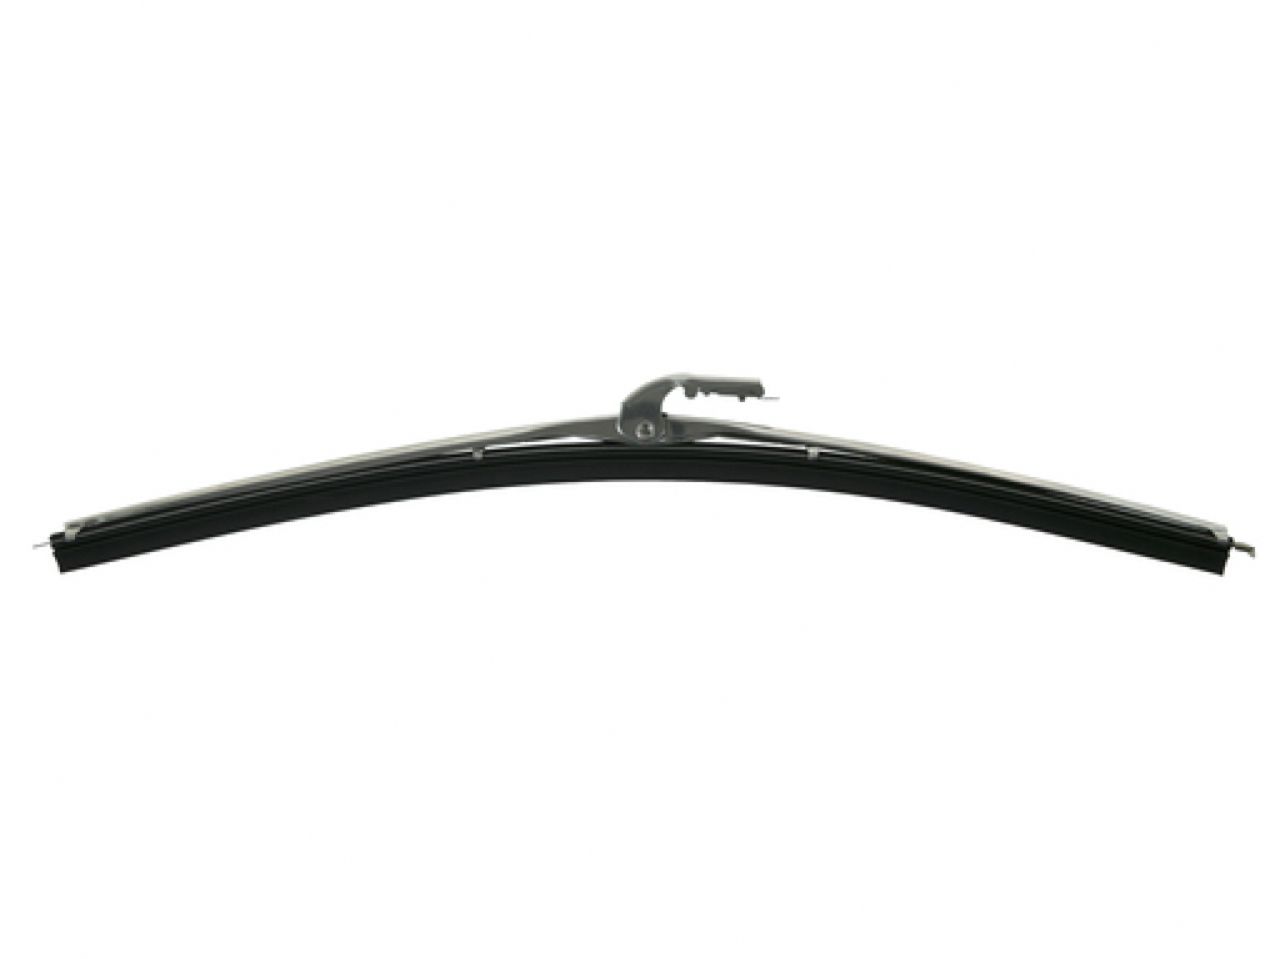 Anco Windshield Wipers 20-15 Item Image